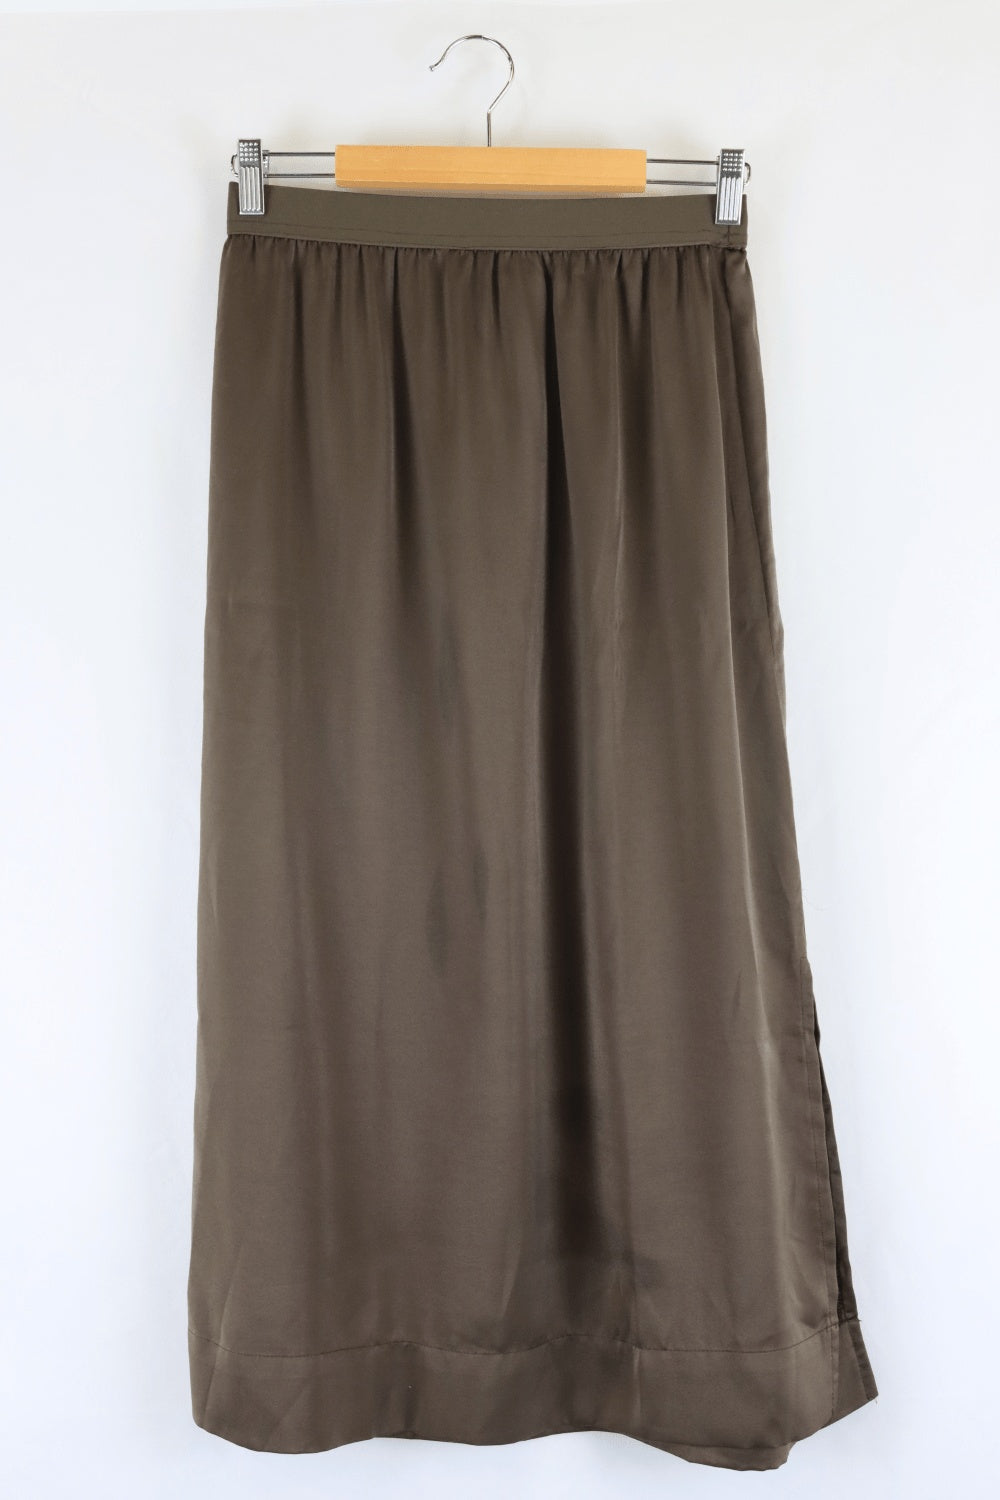 Ceres Brown Skirt 10